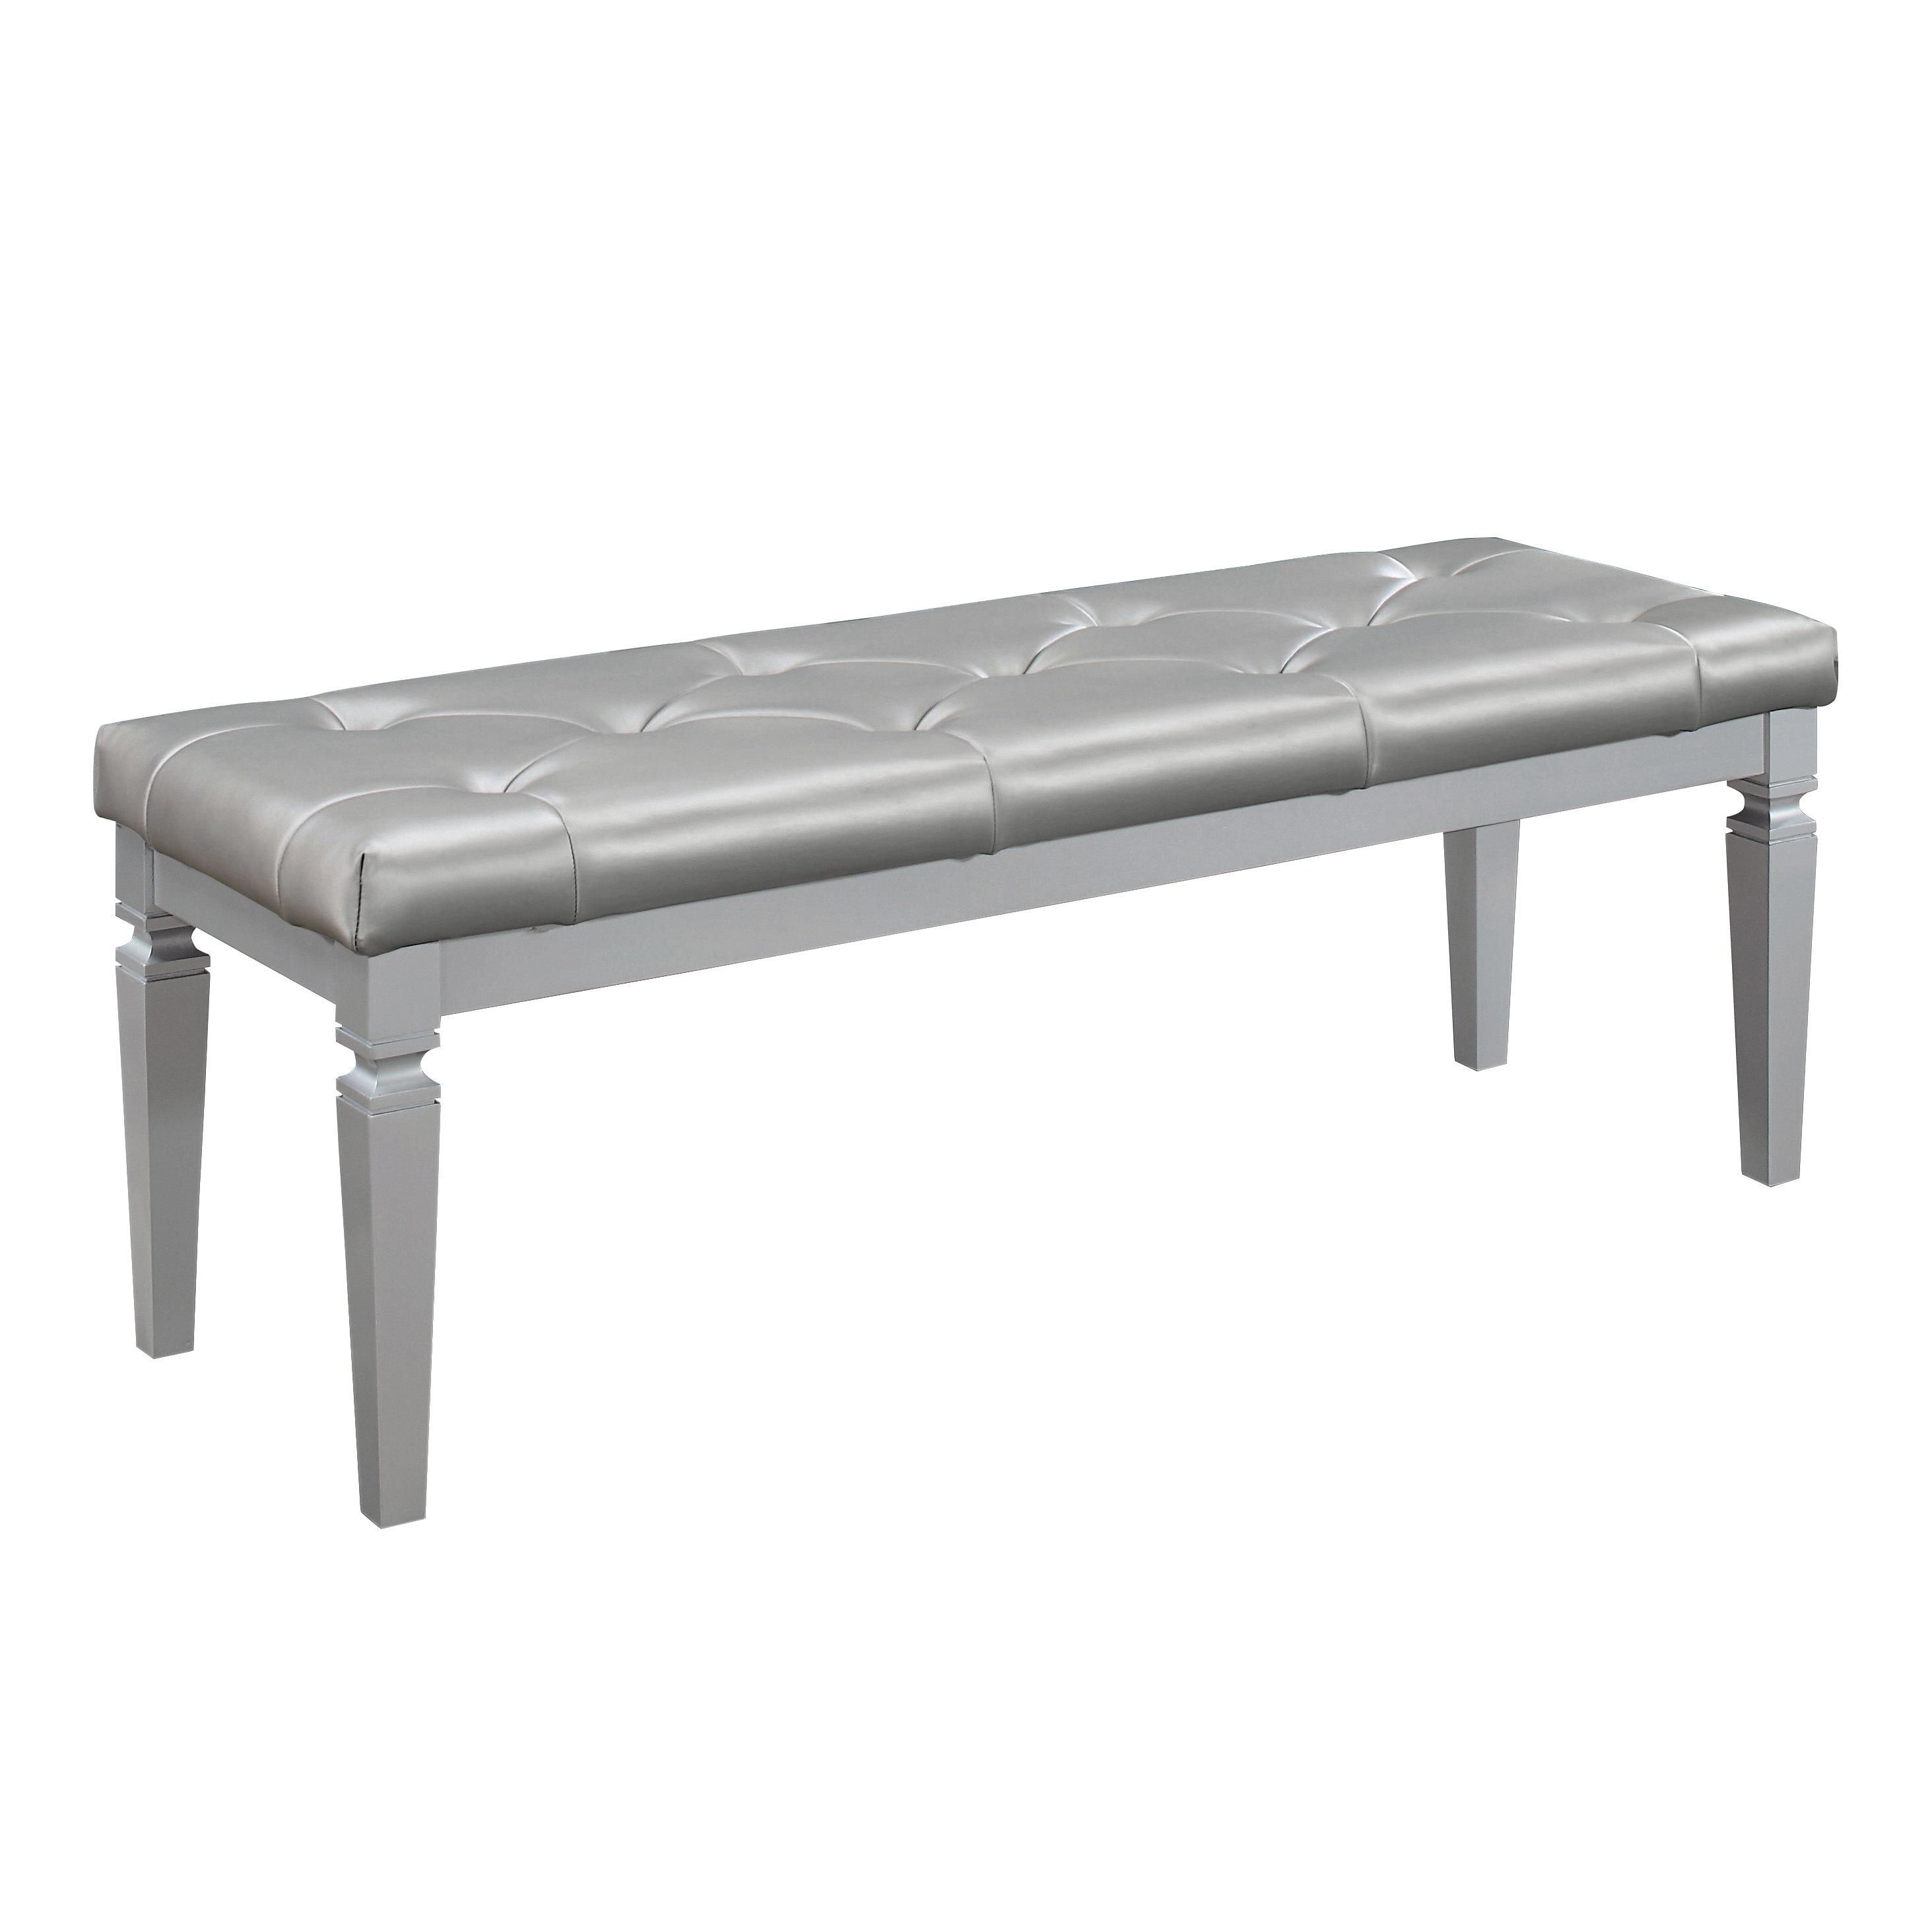 Modern Bed Bench 1916-FBH Allura 1916-FBH in Silver Faux Leather